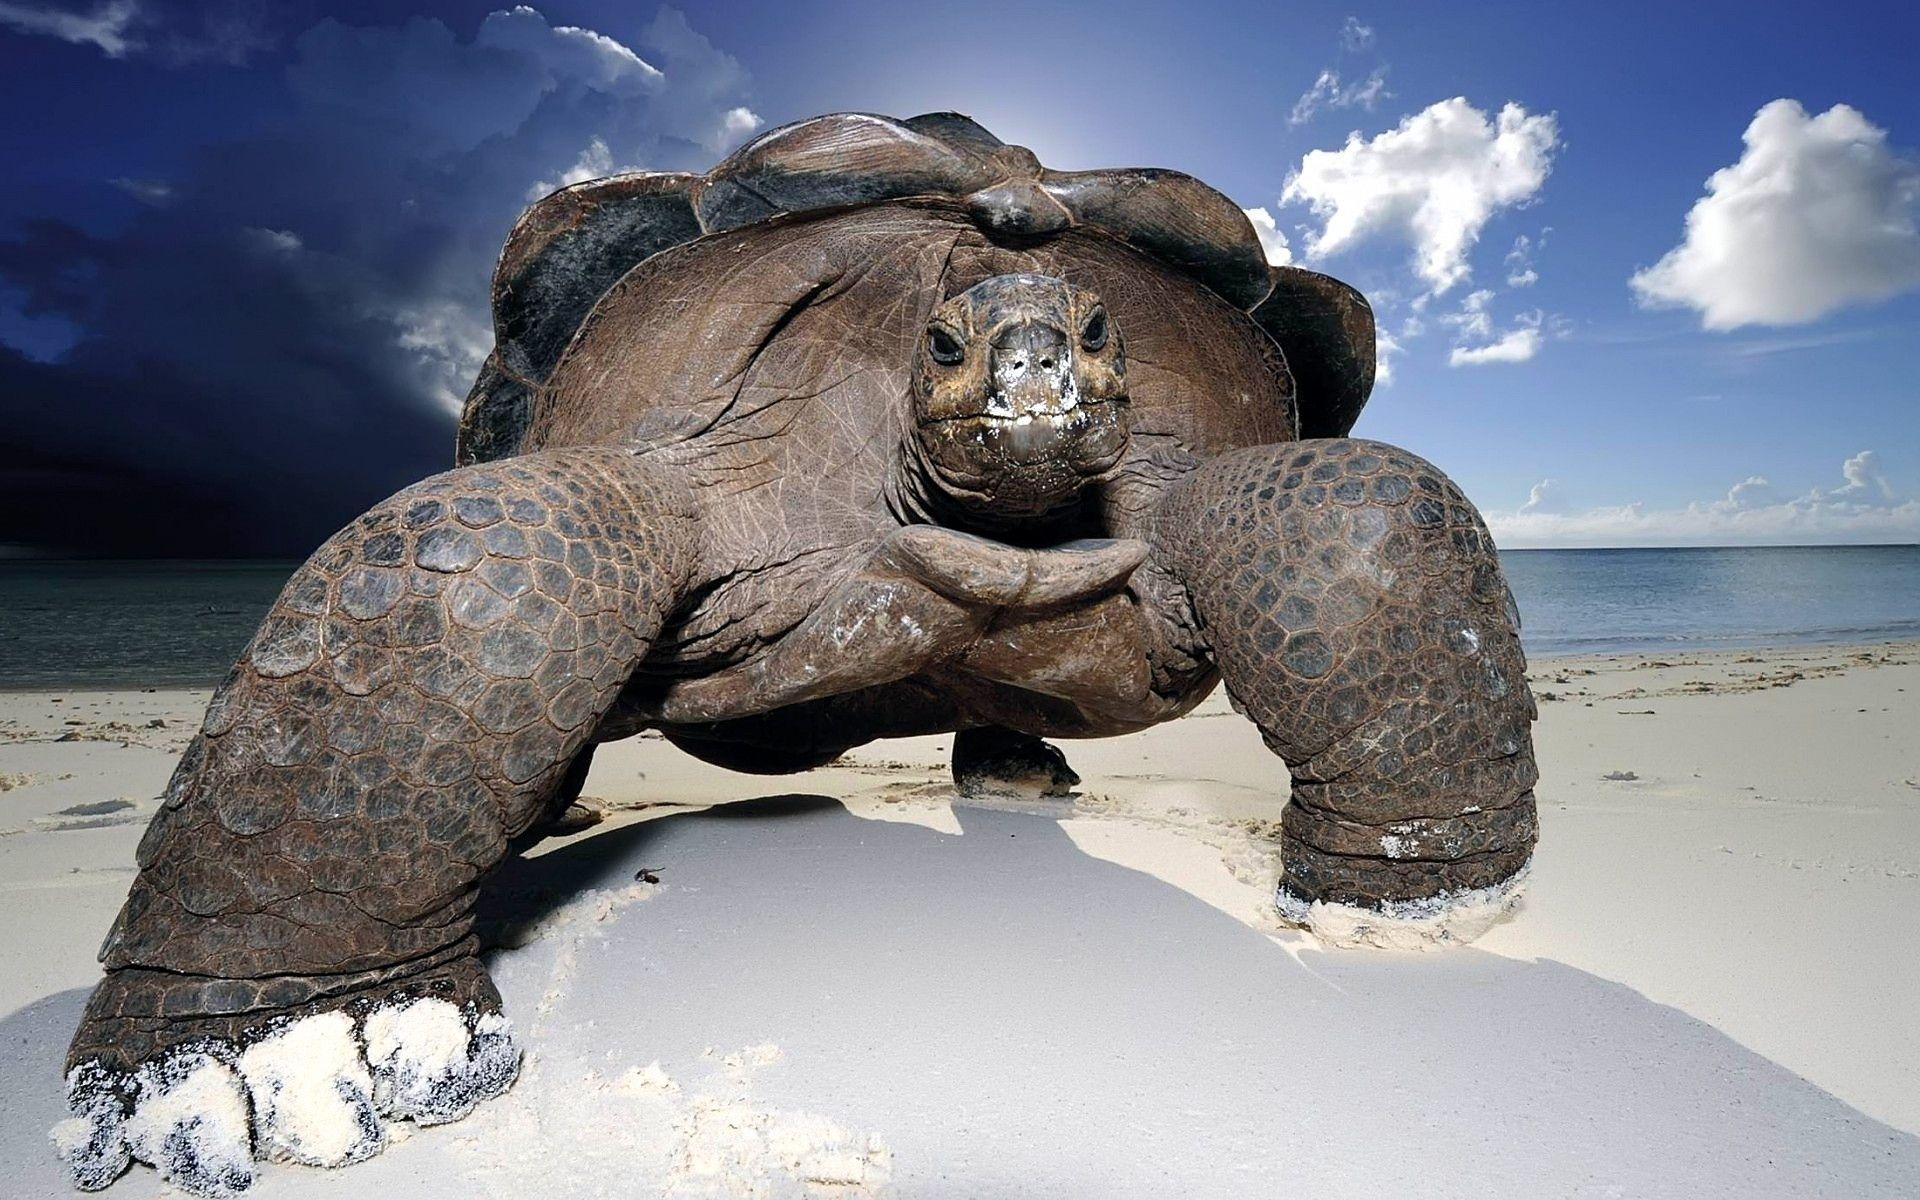 Enchanting Animal Picture HD Wallpaper Giant Turtle 1920x1200PX